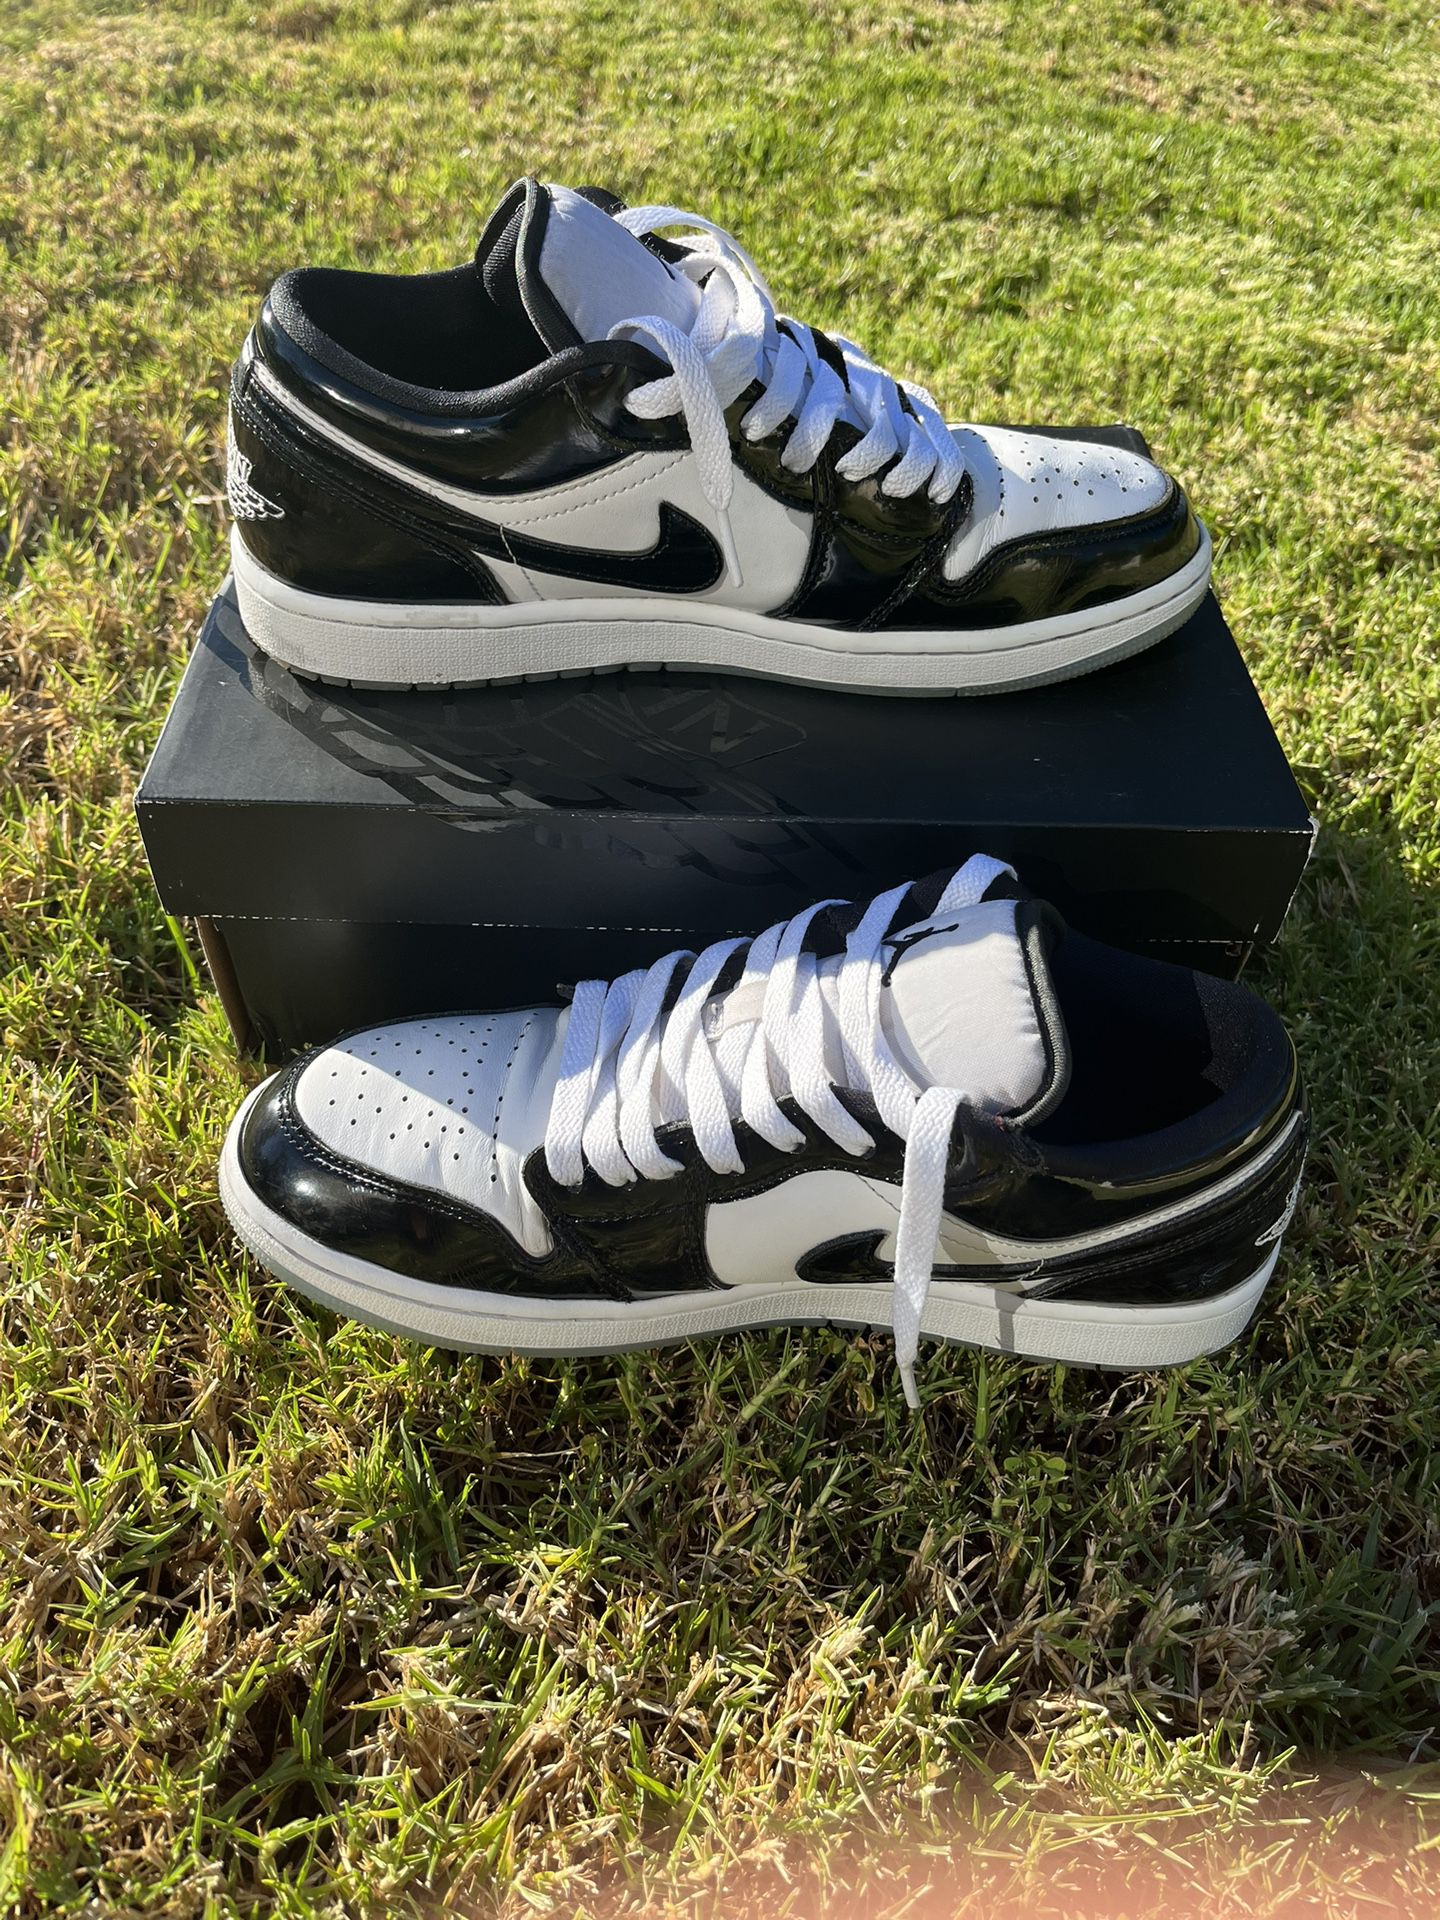 New Nike Air Force 1 Low Sun Club Shoes Men's 9 for Sale in El Cajon, CA -  OfferUp